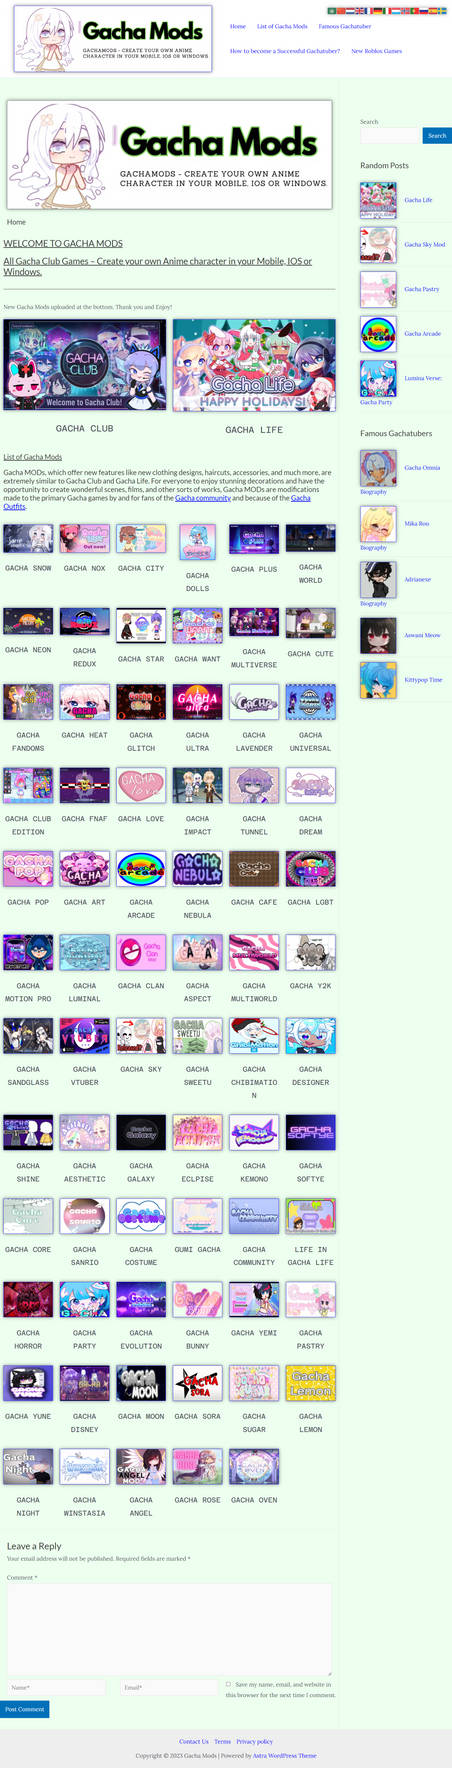 Comments 162 to 123 of 233 - Gacha Fandoms(gacha mod) by akito